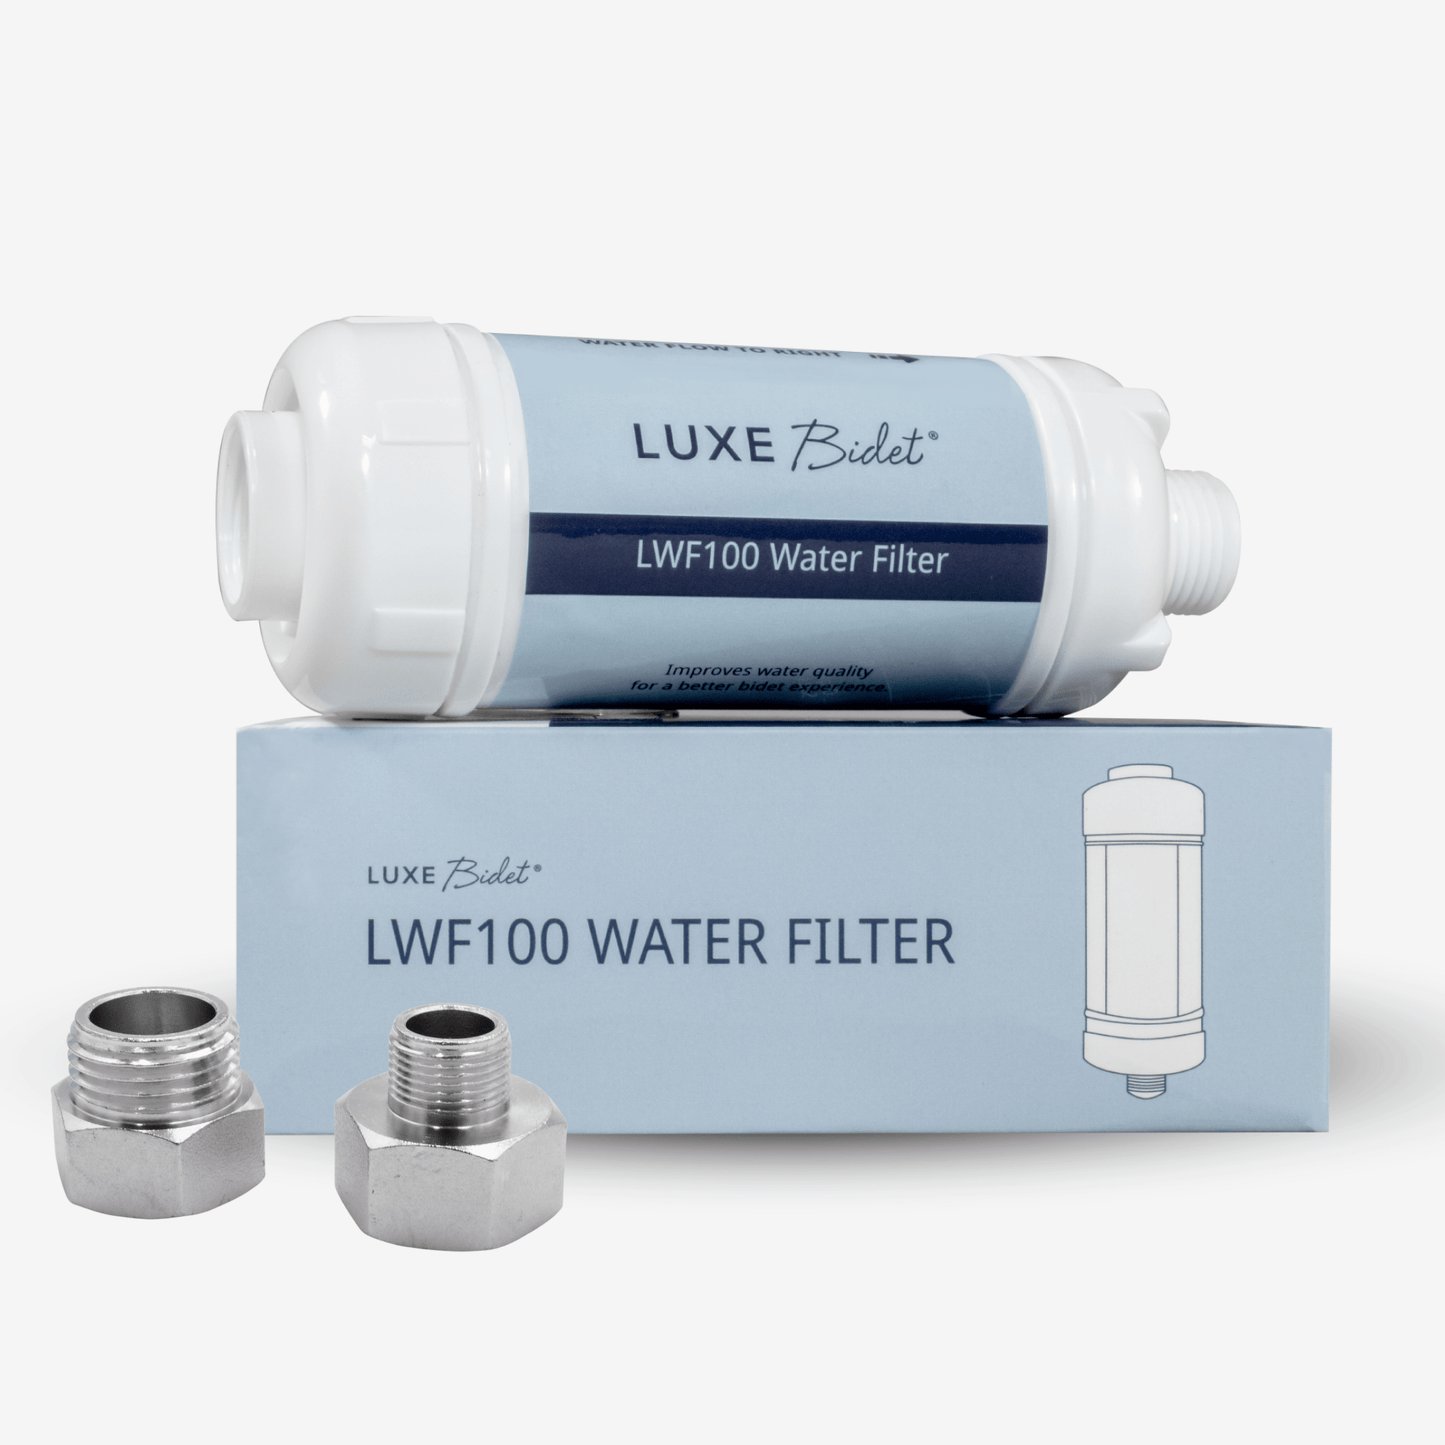 LUXE Bidet 4-in-1 Filtration Water Filter with 3/8" Metal Converters packaging